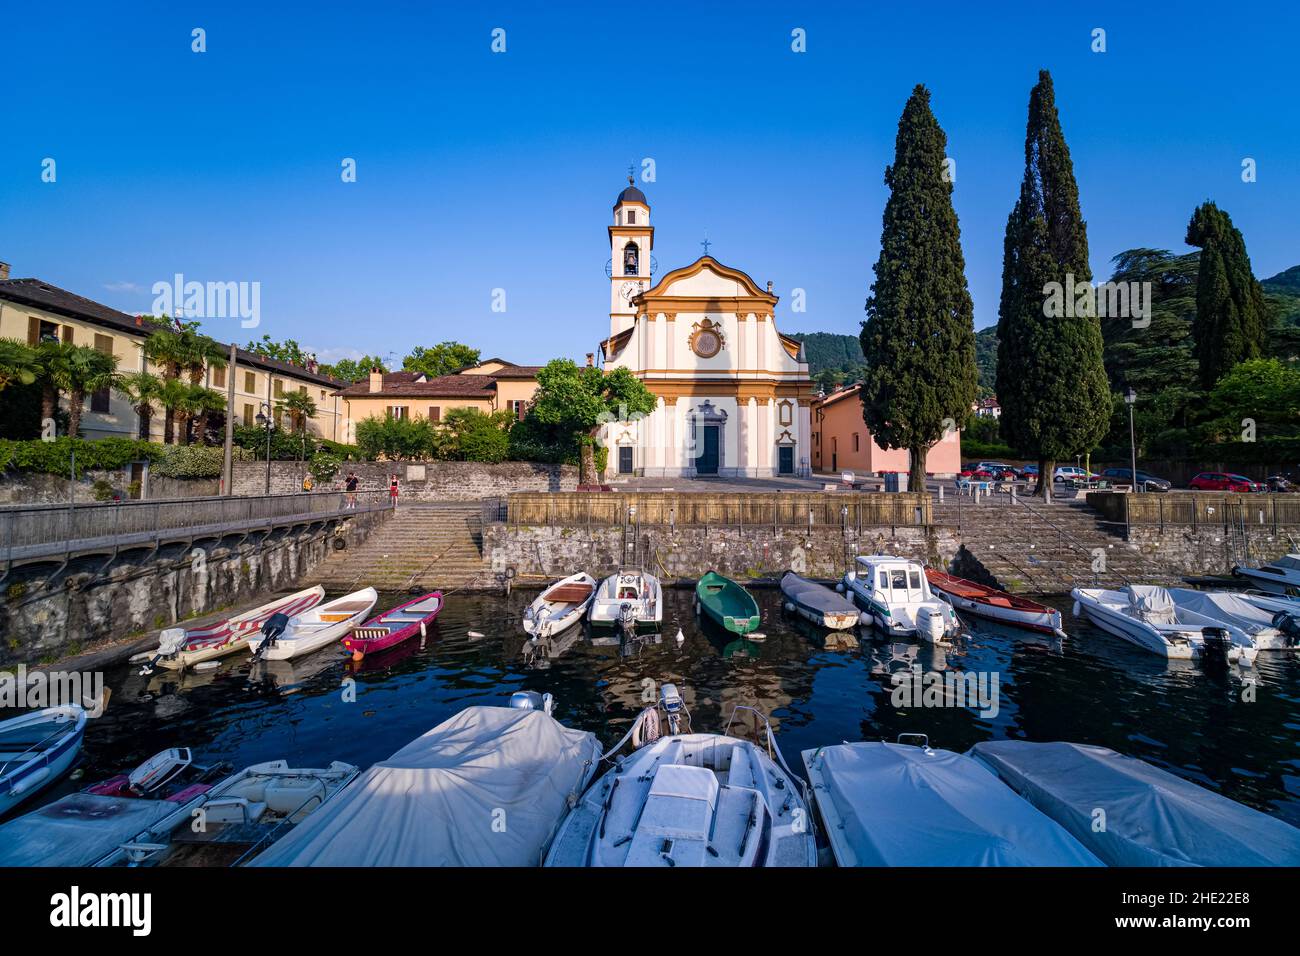 The church Chiesa S. Giovanni, located at the harbour of the small town. Stock Photo